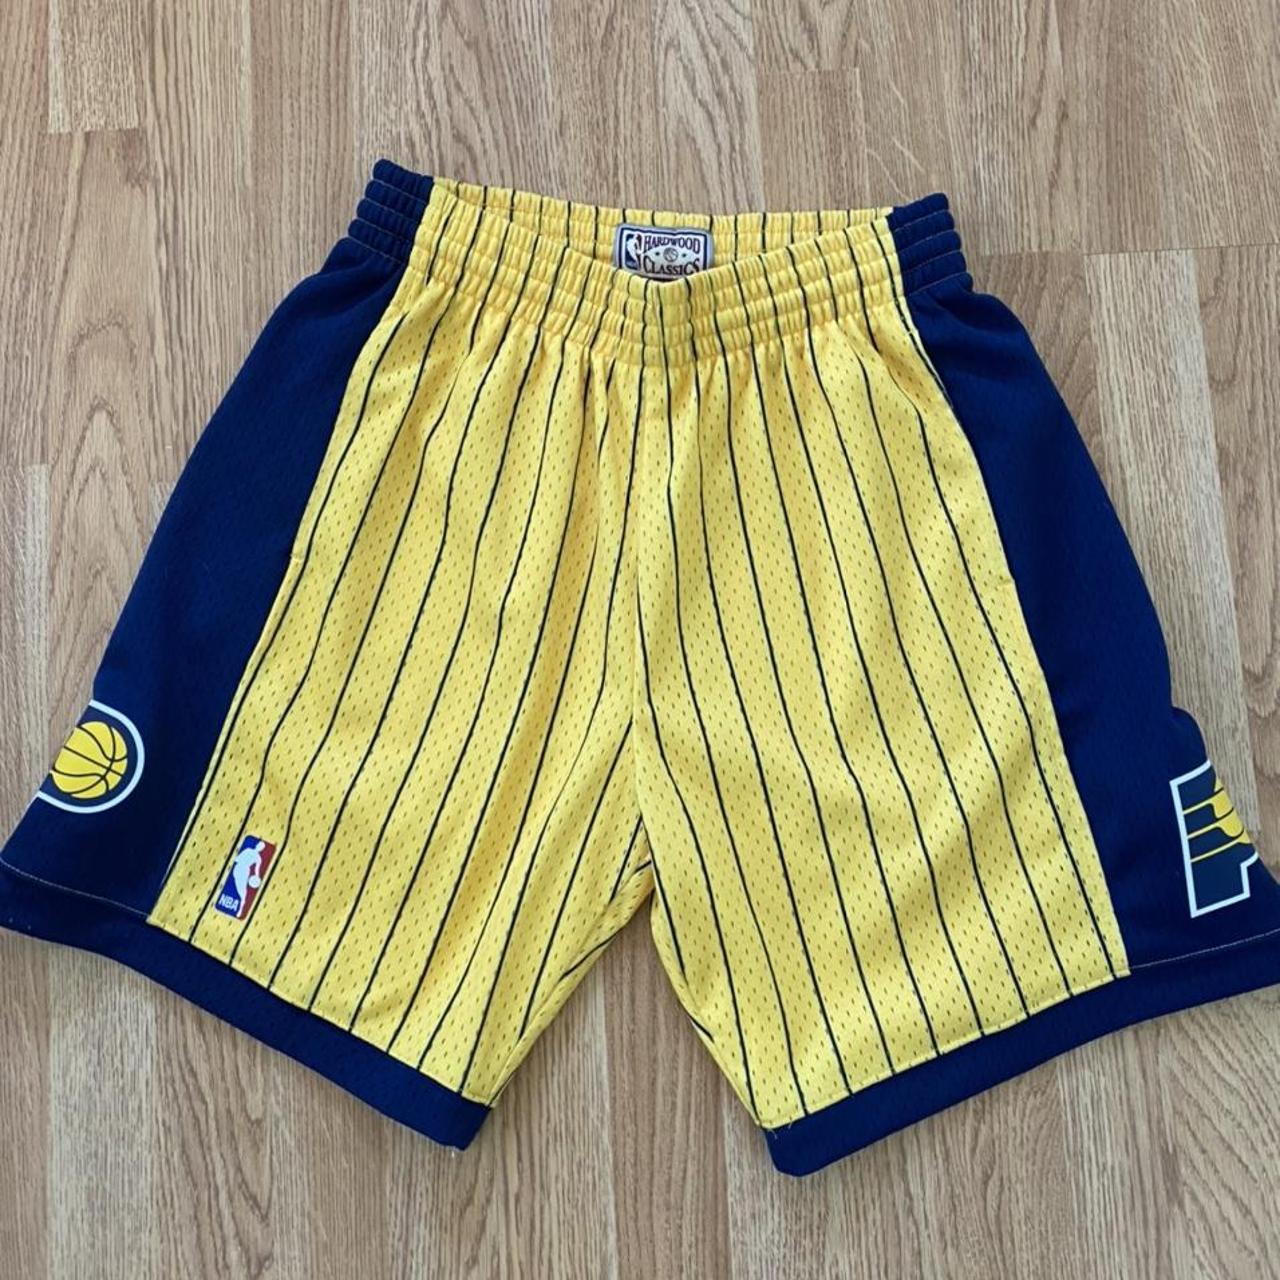 Pacers Shorts 